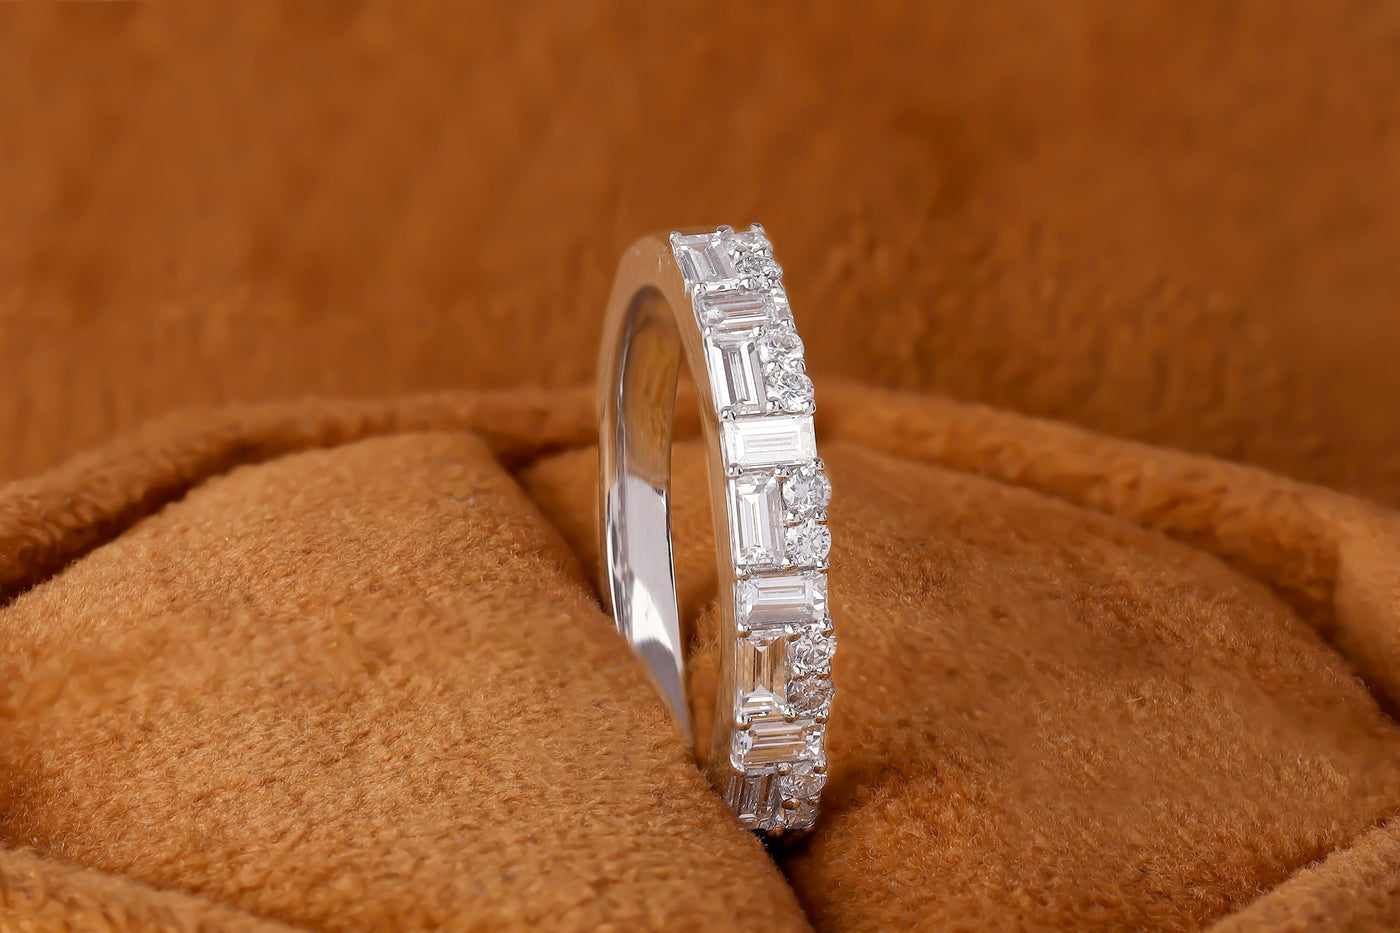 Vintage Baguette Moissanite Band, Solid 14K White Gold Band, Baguette Cut Moissanite Wedding Band, Half Eternity Stacking Band, Promise Band